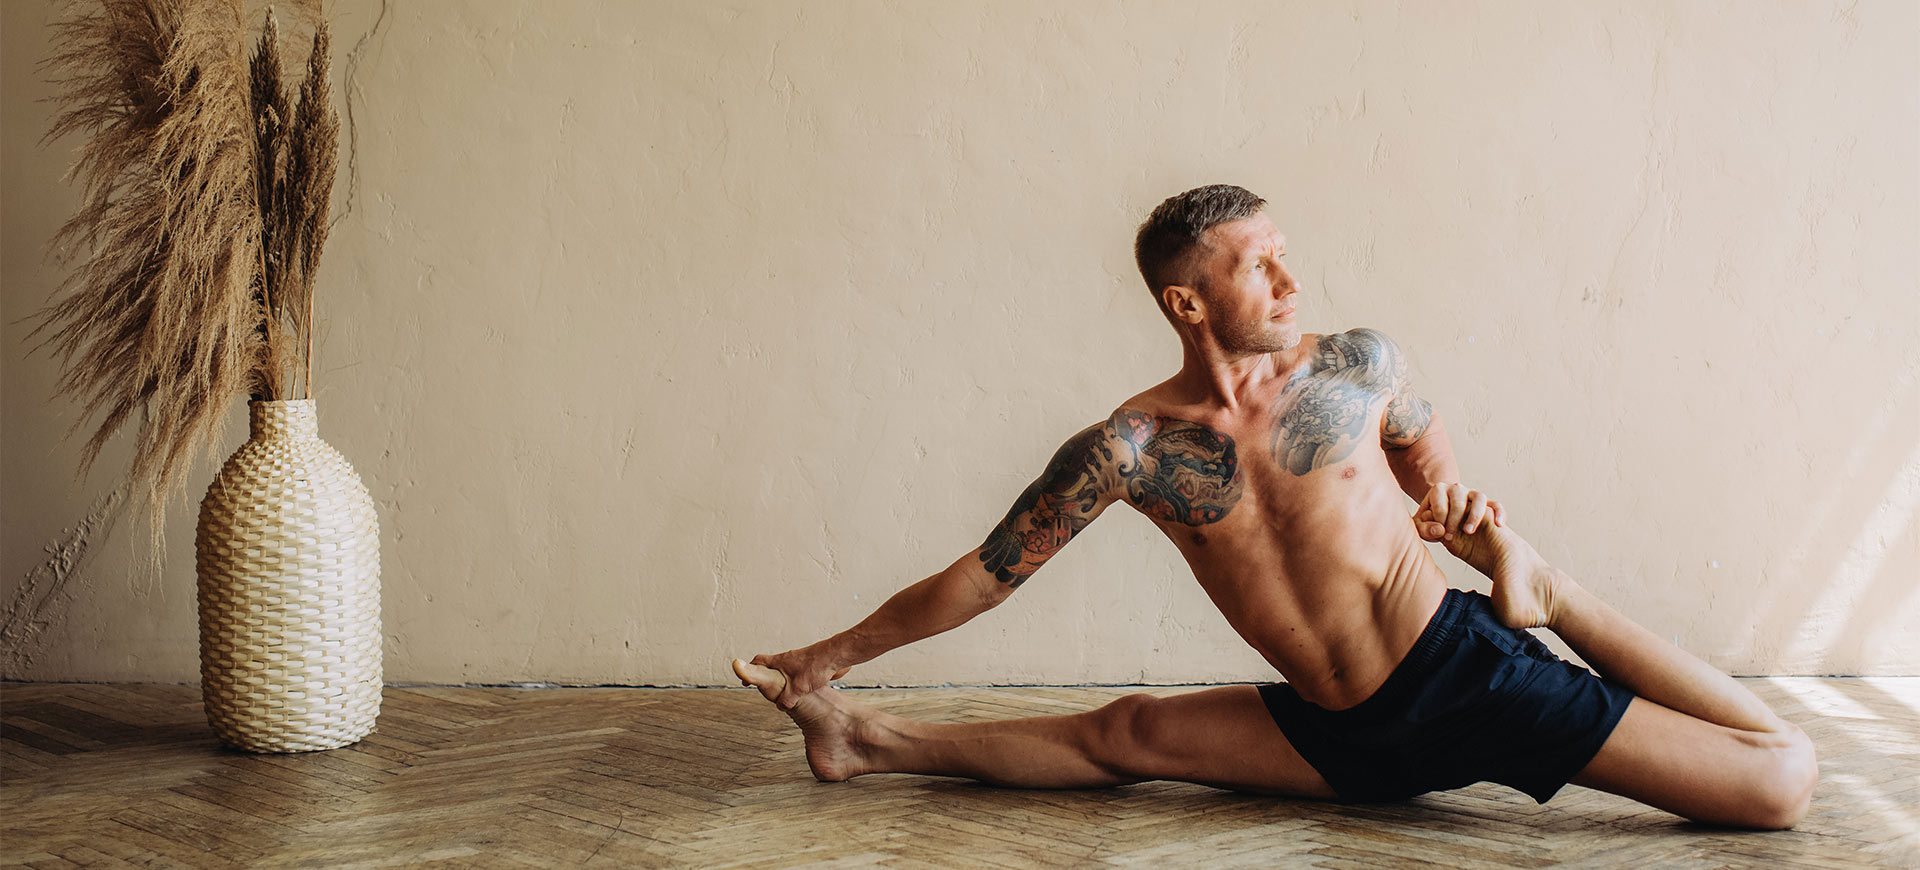 https://www.momoyoga.com/assets/images/964-3629110369484-38cEE5/header-yoga-is-for-everybody-making-men-feel-more-included-in-your-yoga-classes.jpg